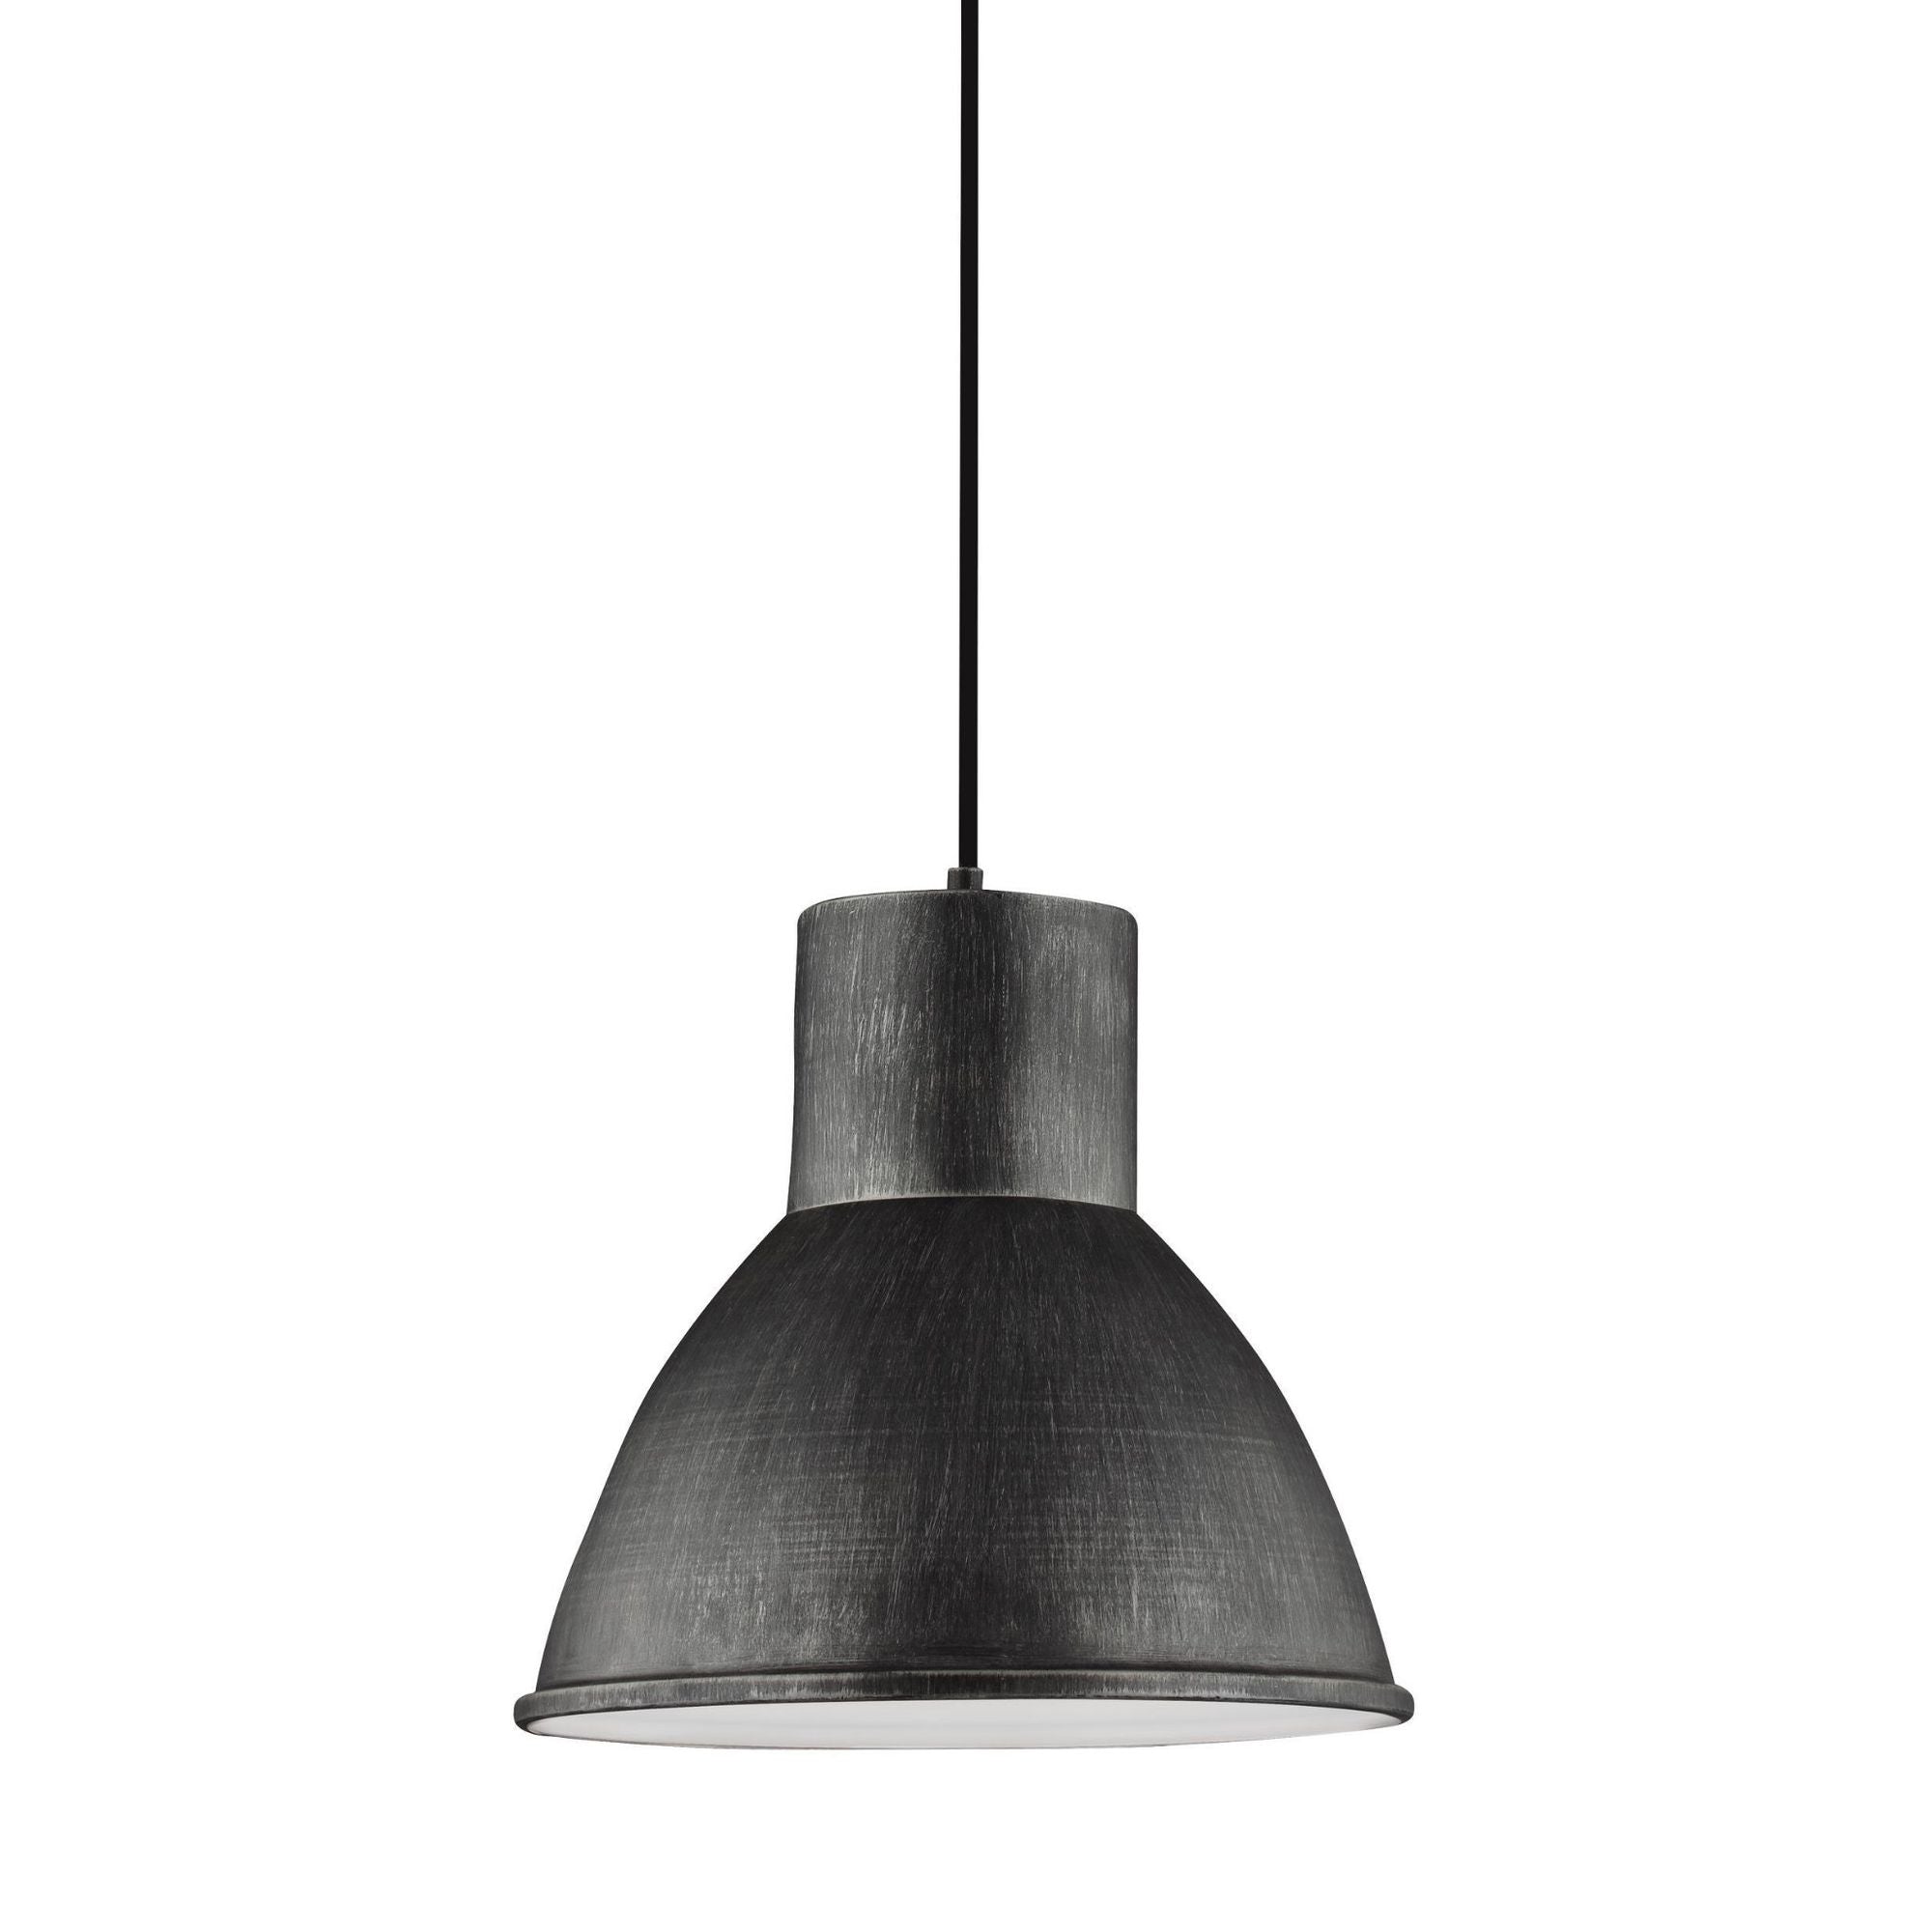 Division Street One Light Pendant LED Contemporary 14" Height Steel in Stardust